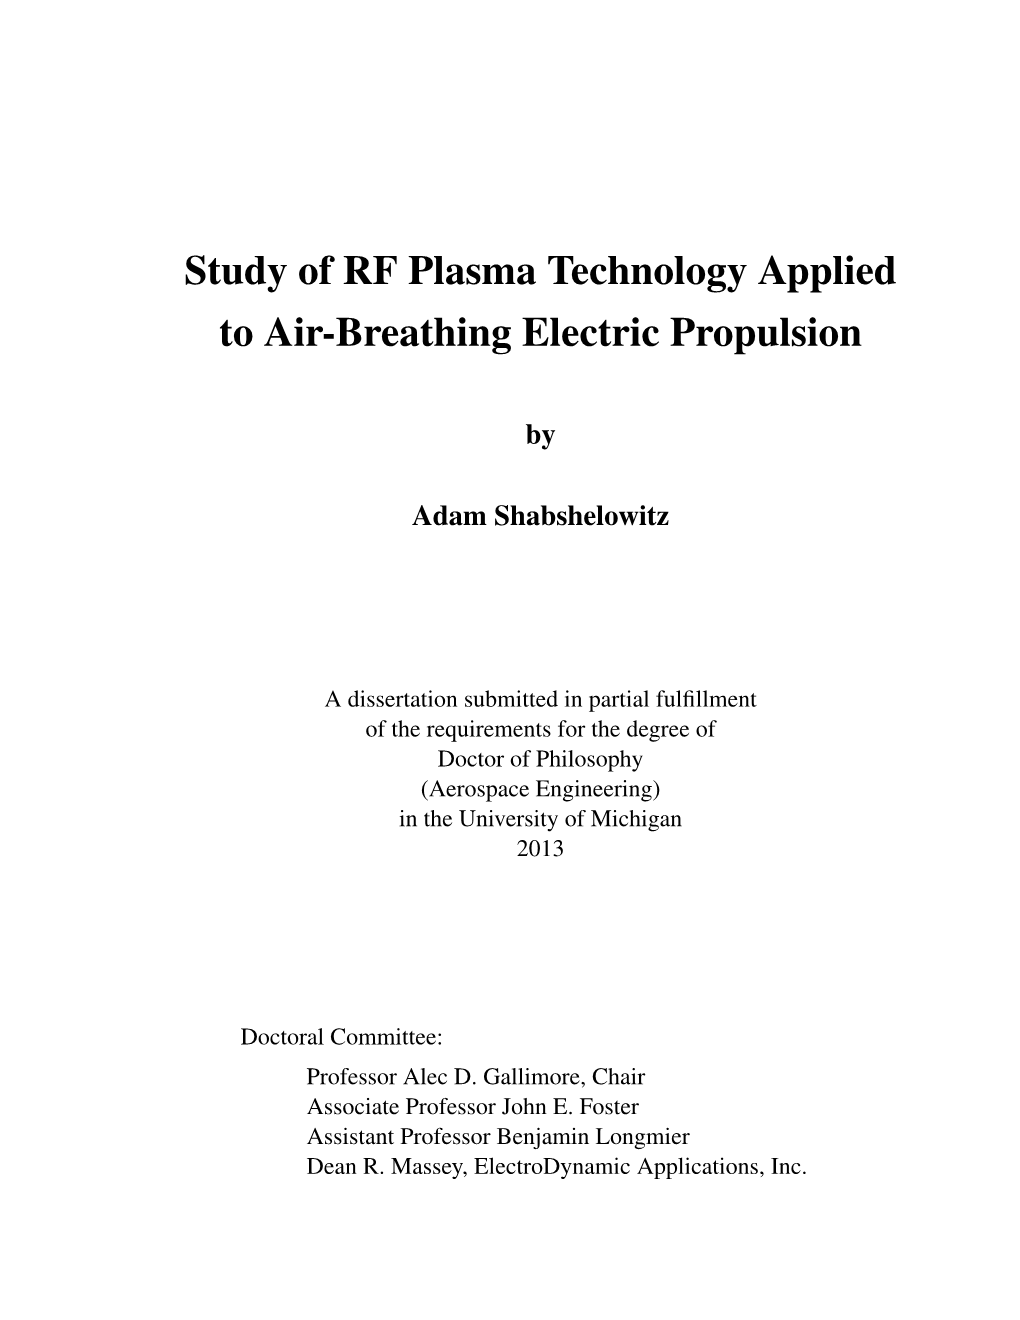 Study of RF Plasma Technology Applied to Air-Breathing Electric Propulsion